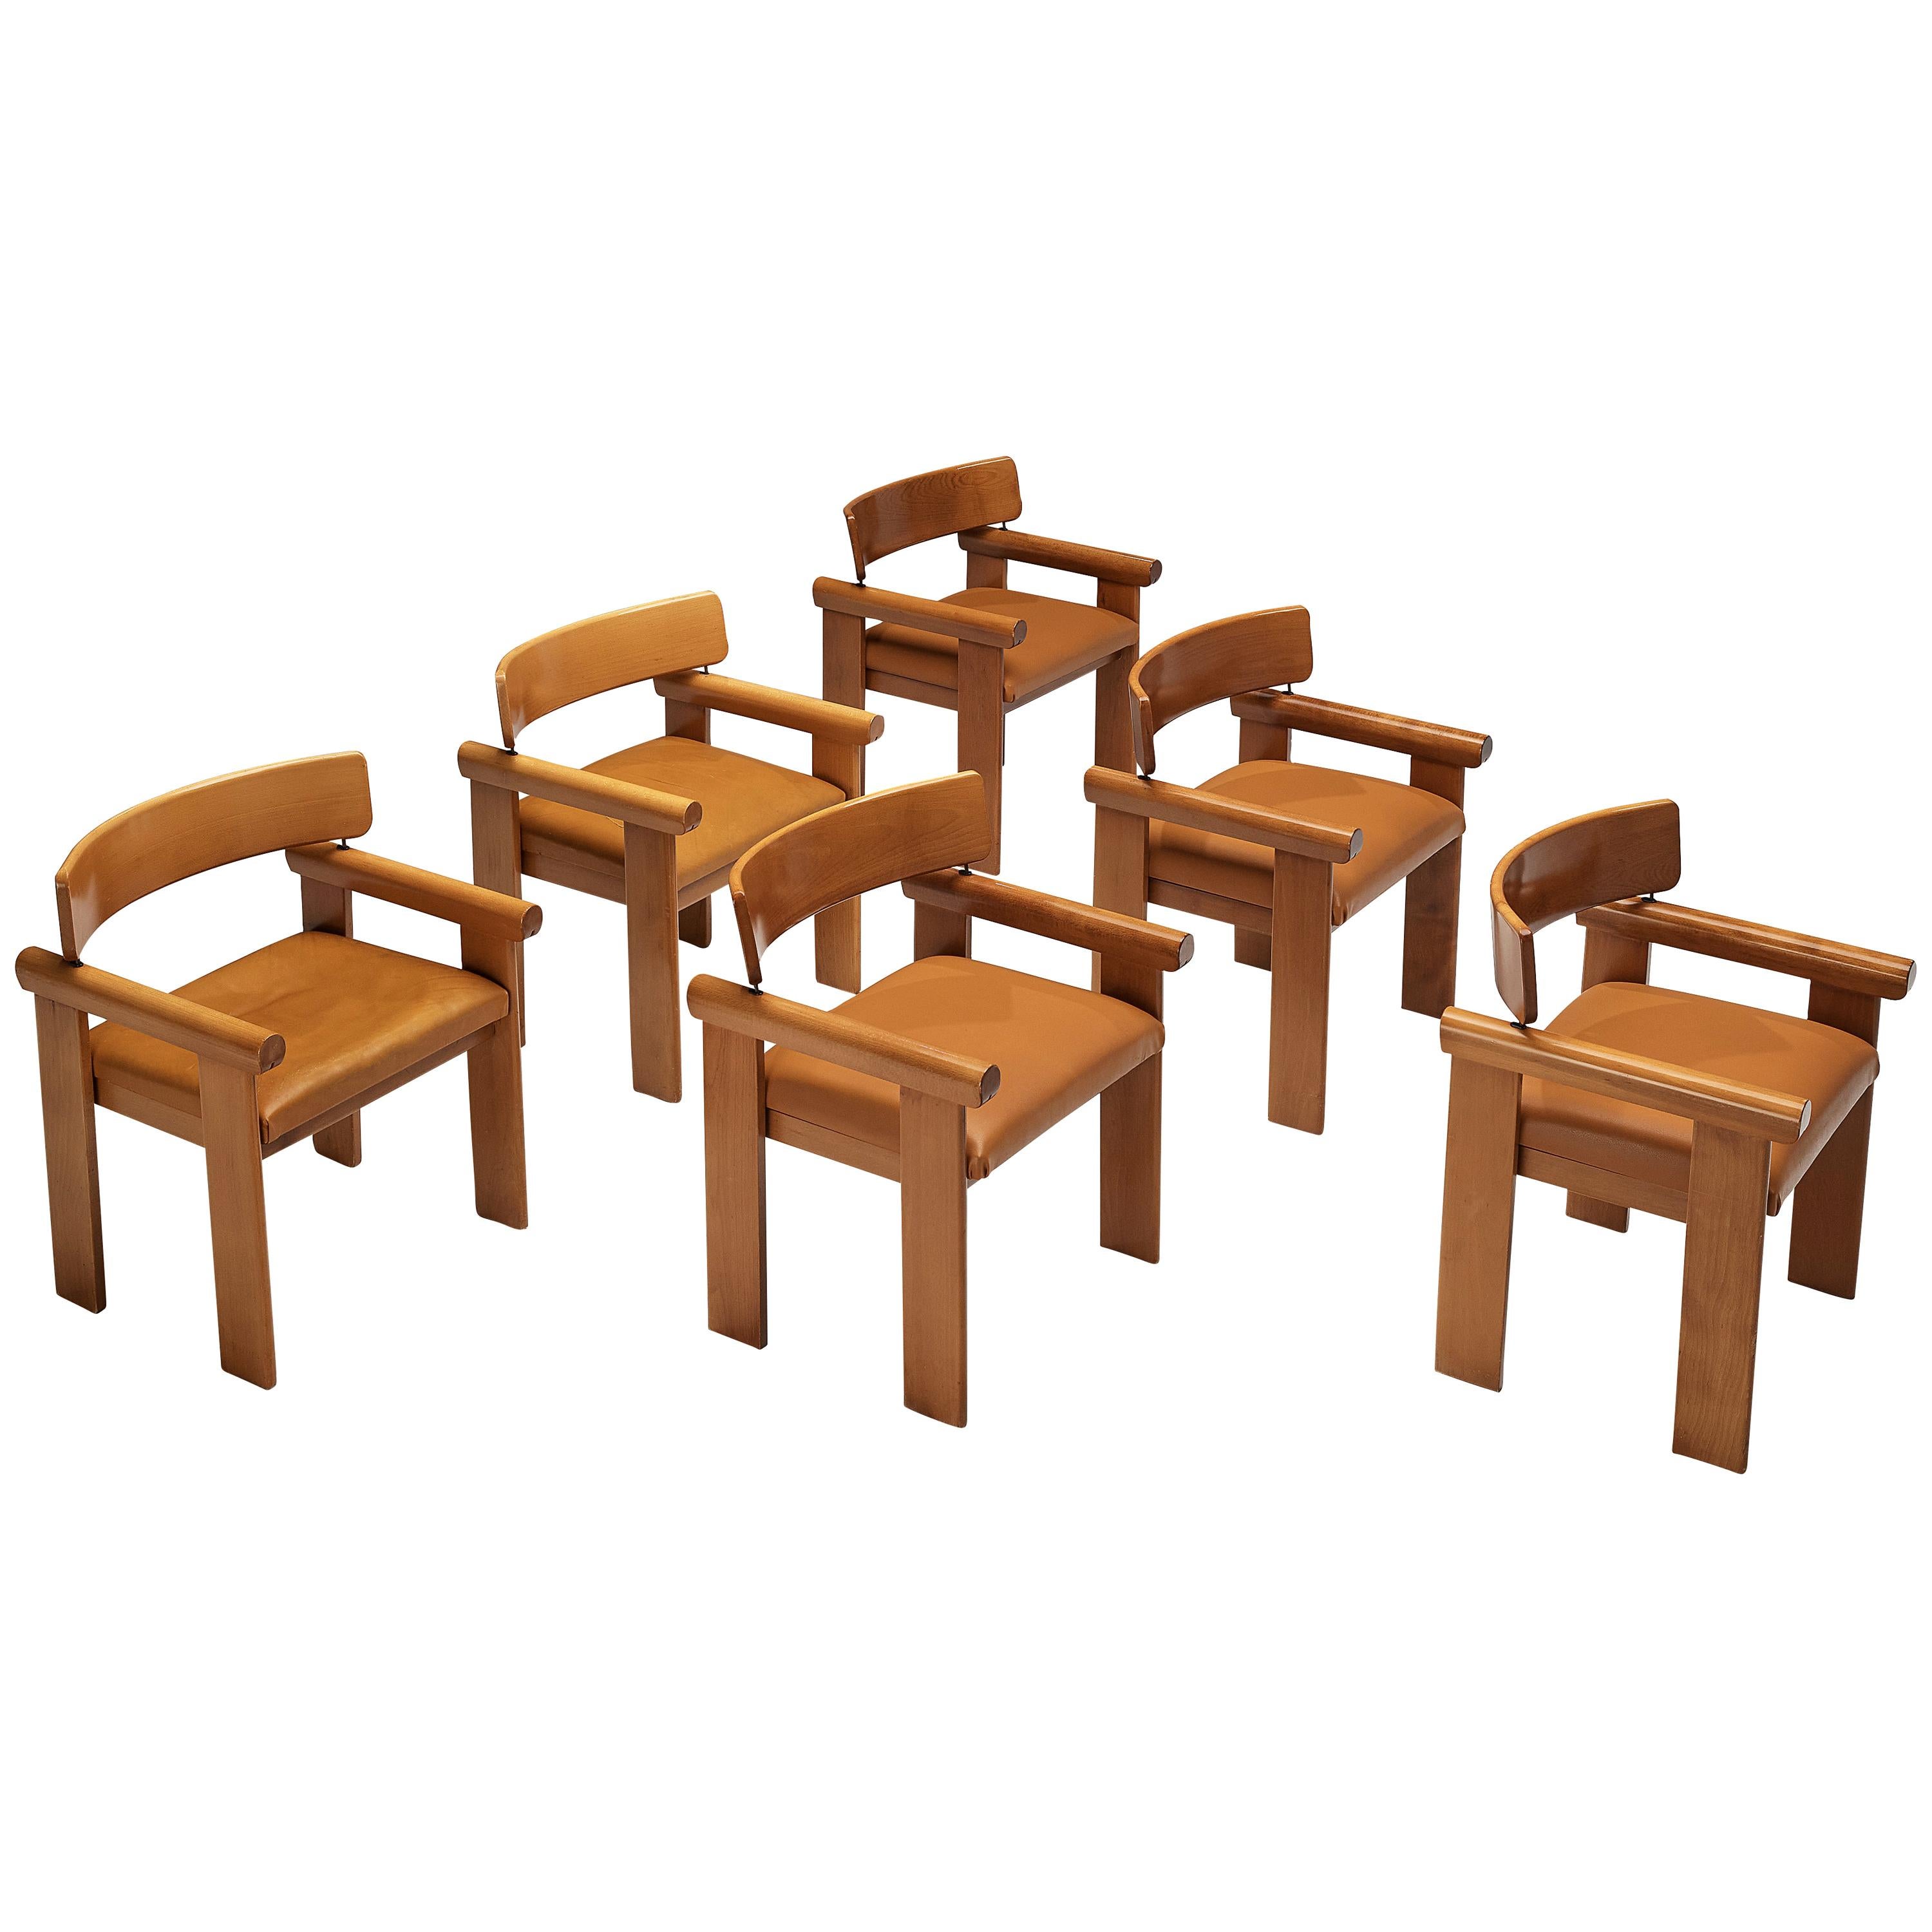 Italian Set of 6 Architectural Armchairs in Beech and Cognac Leather